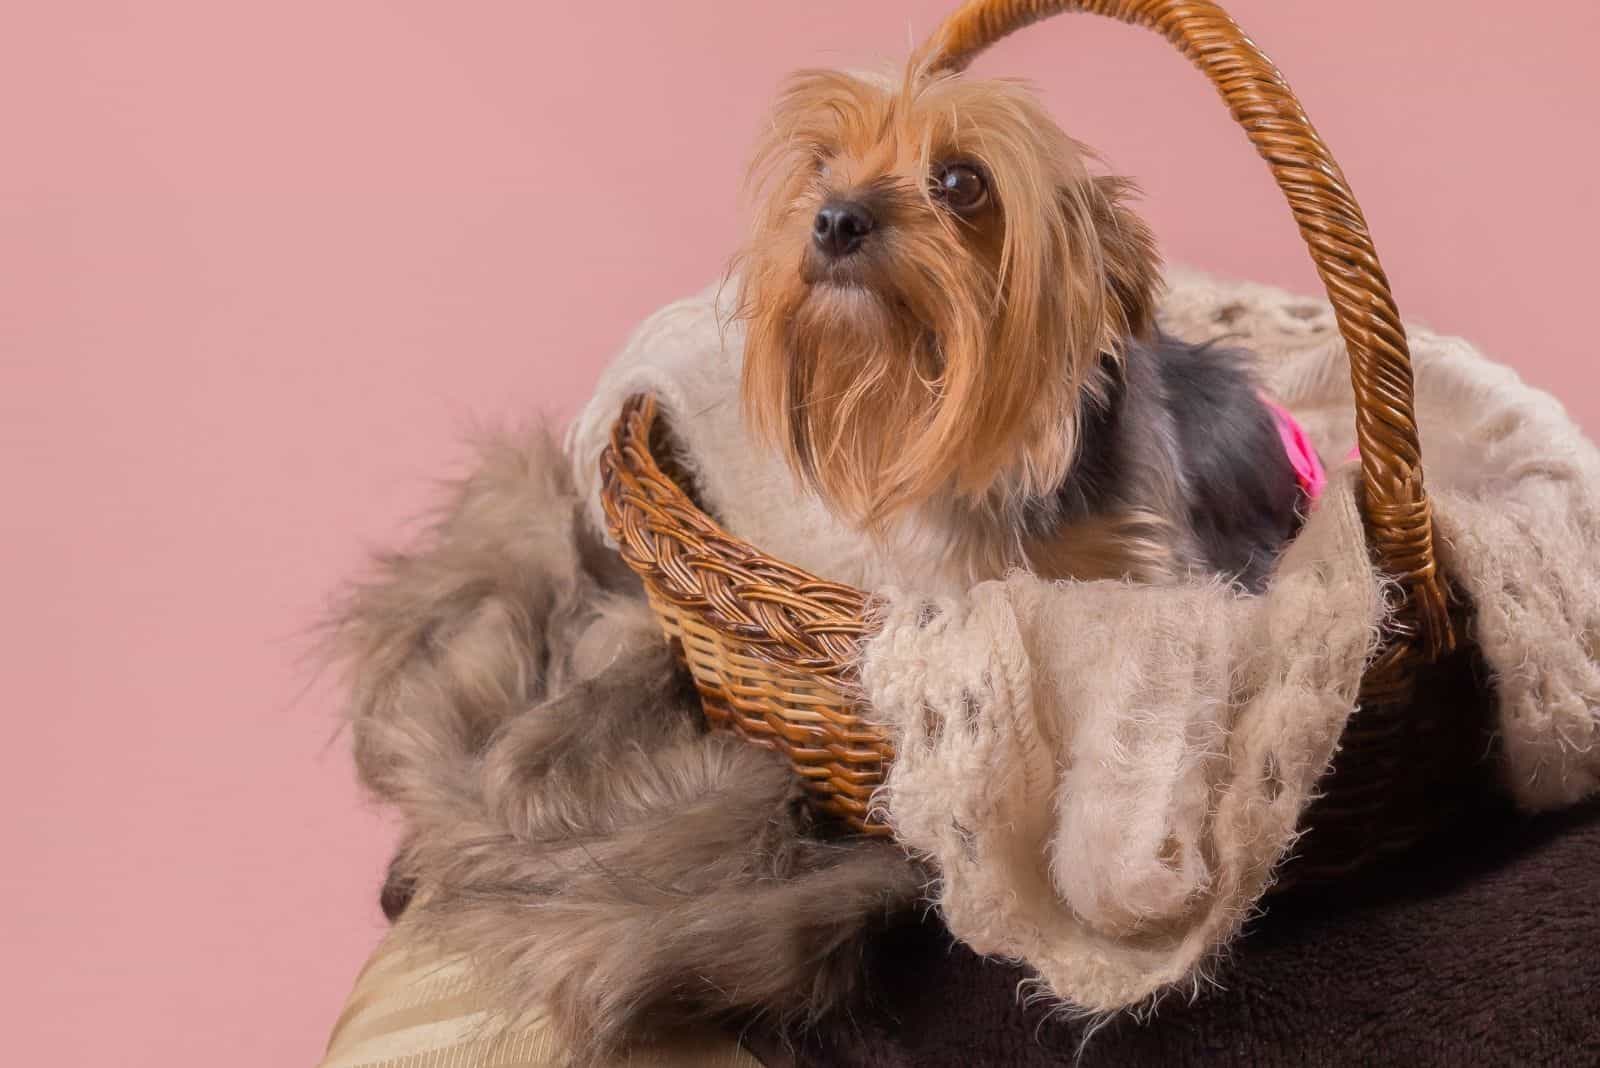 pregnant yorkshire pet inside a basket with knitted cloth inside